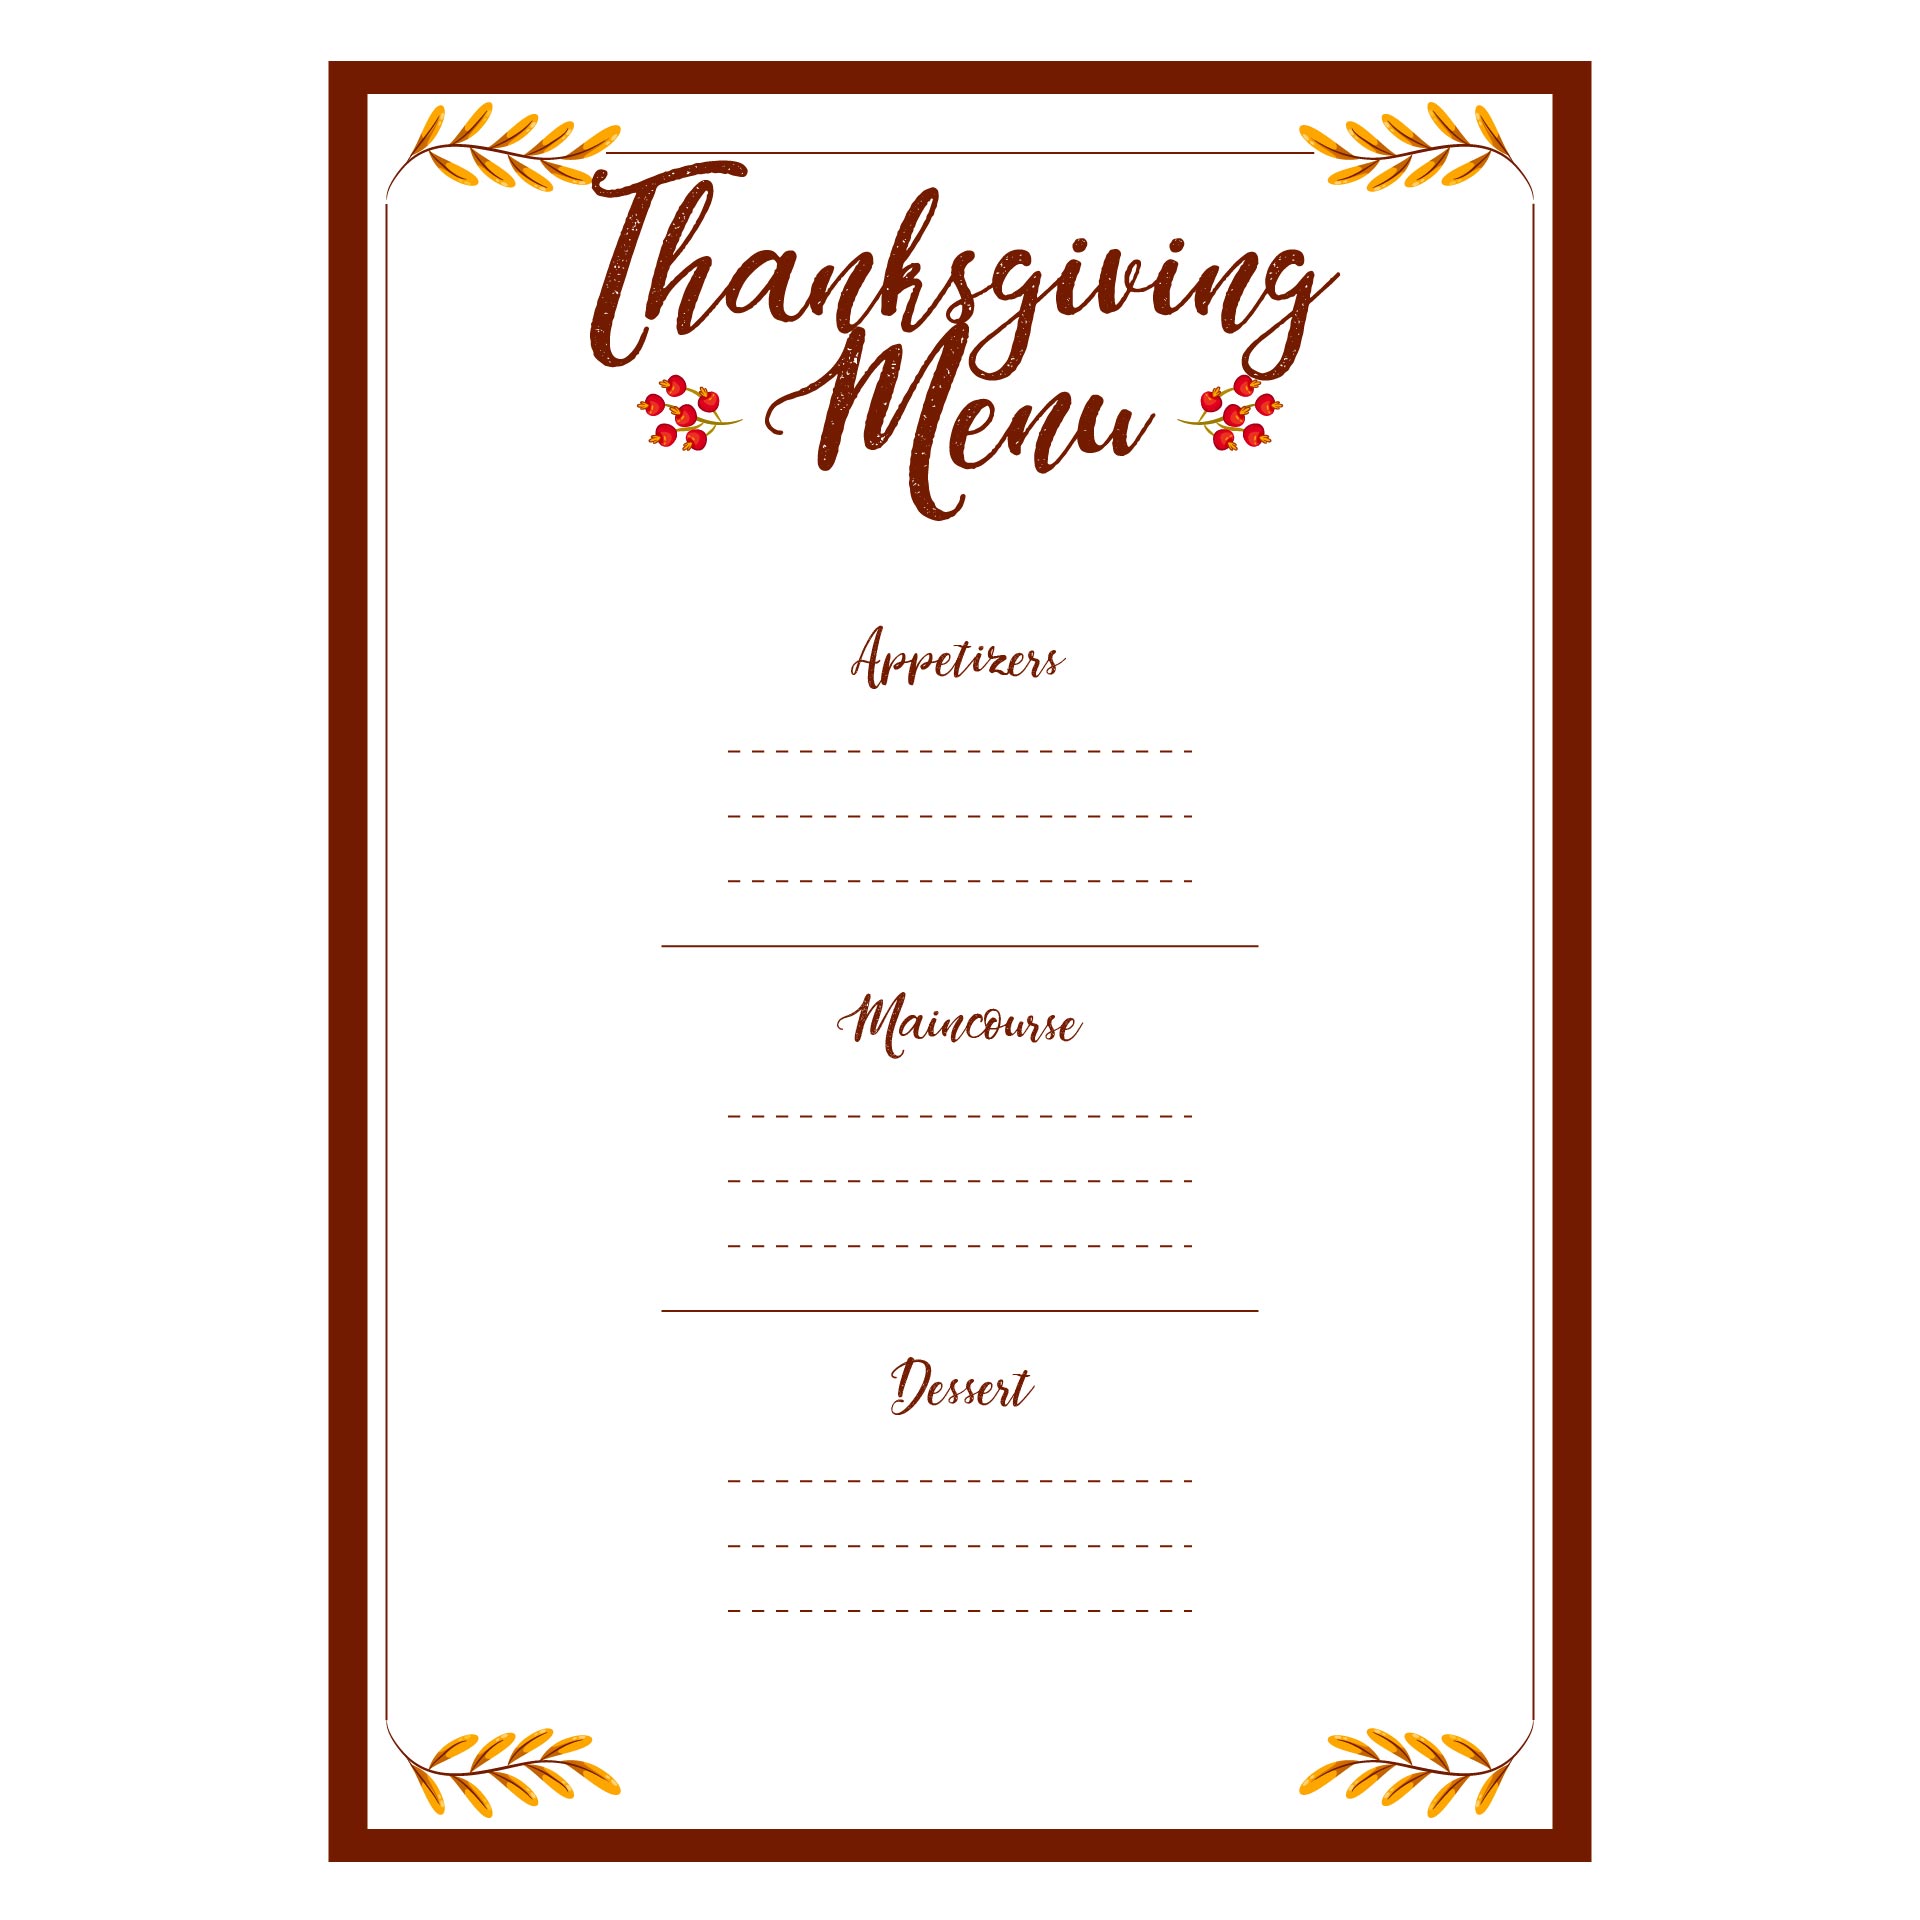 9 Best Images of Thanksgiving Menu Card Printable Templates